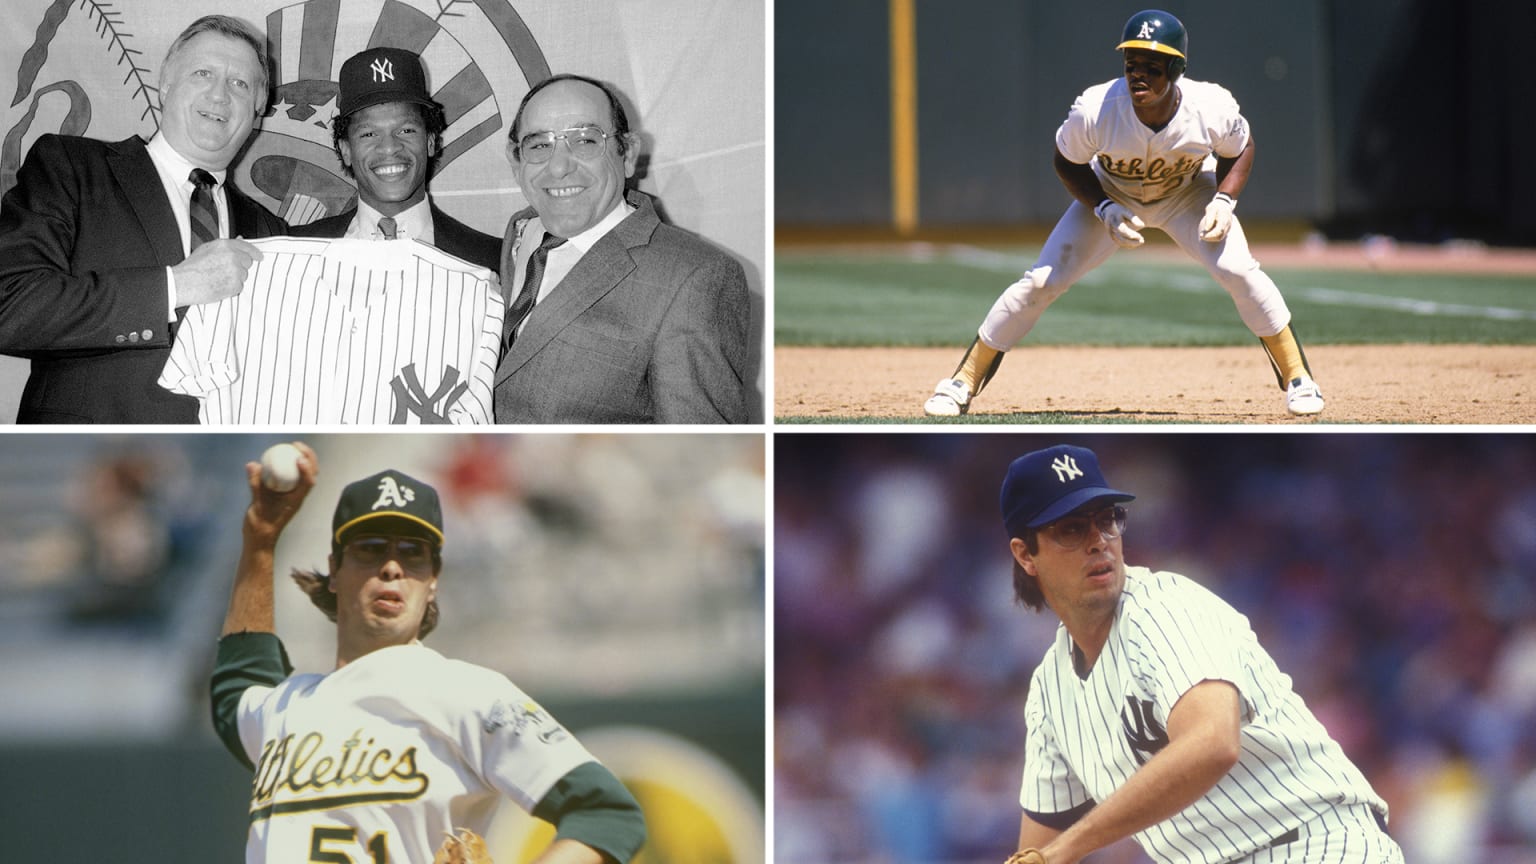 4 images of Rickey Henderson and Eric Plunk